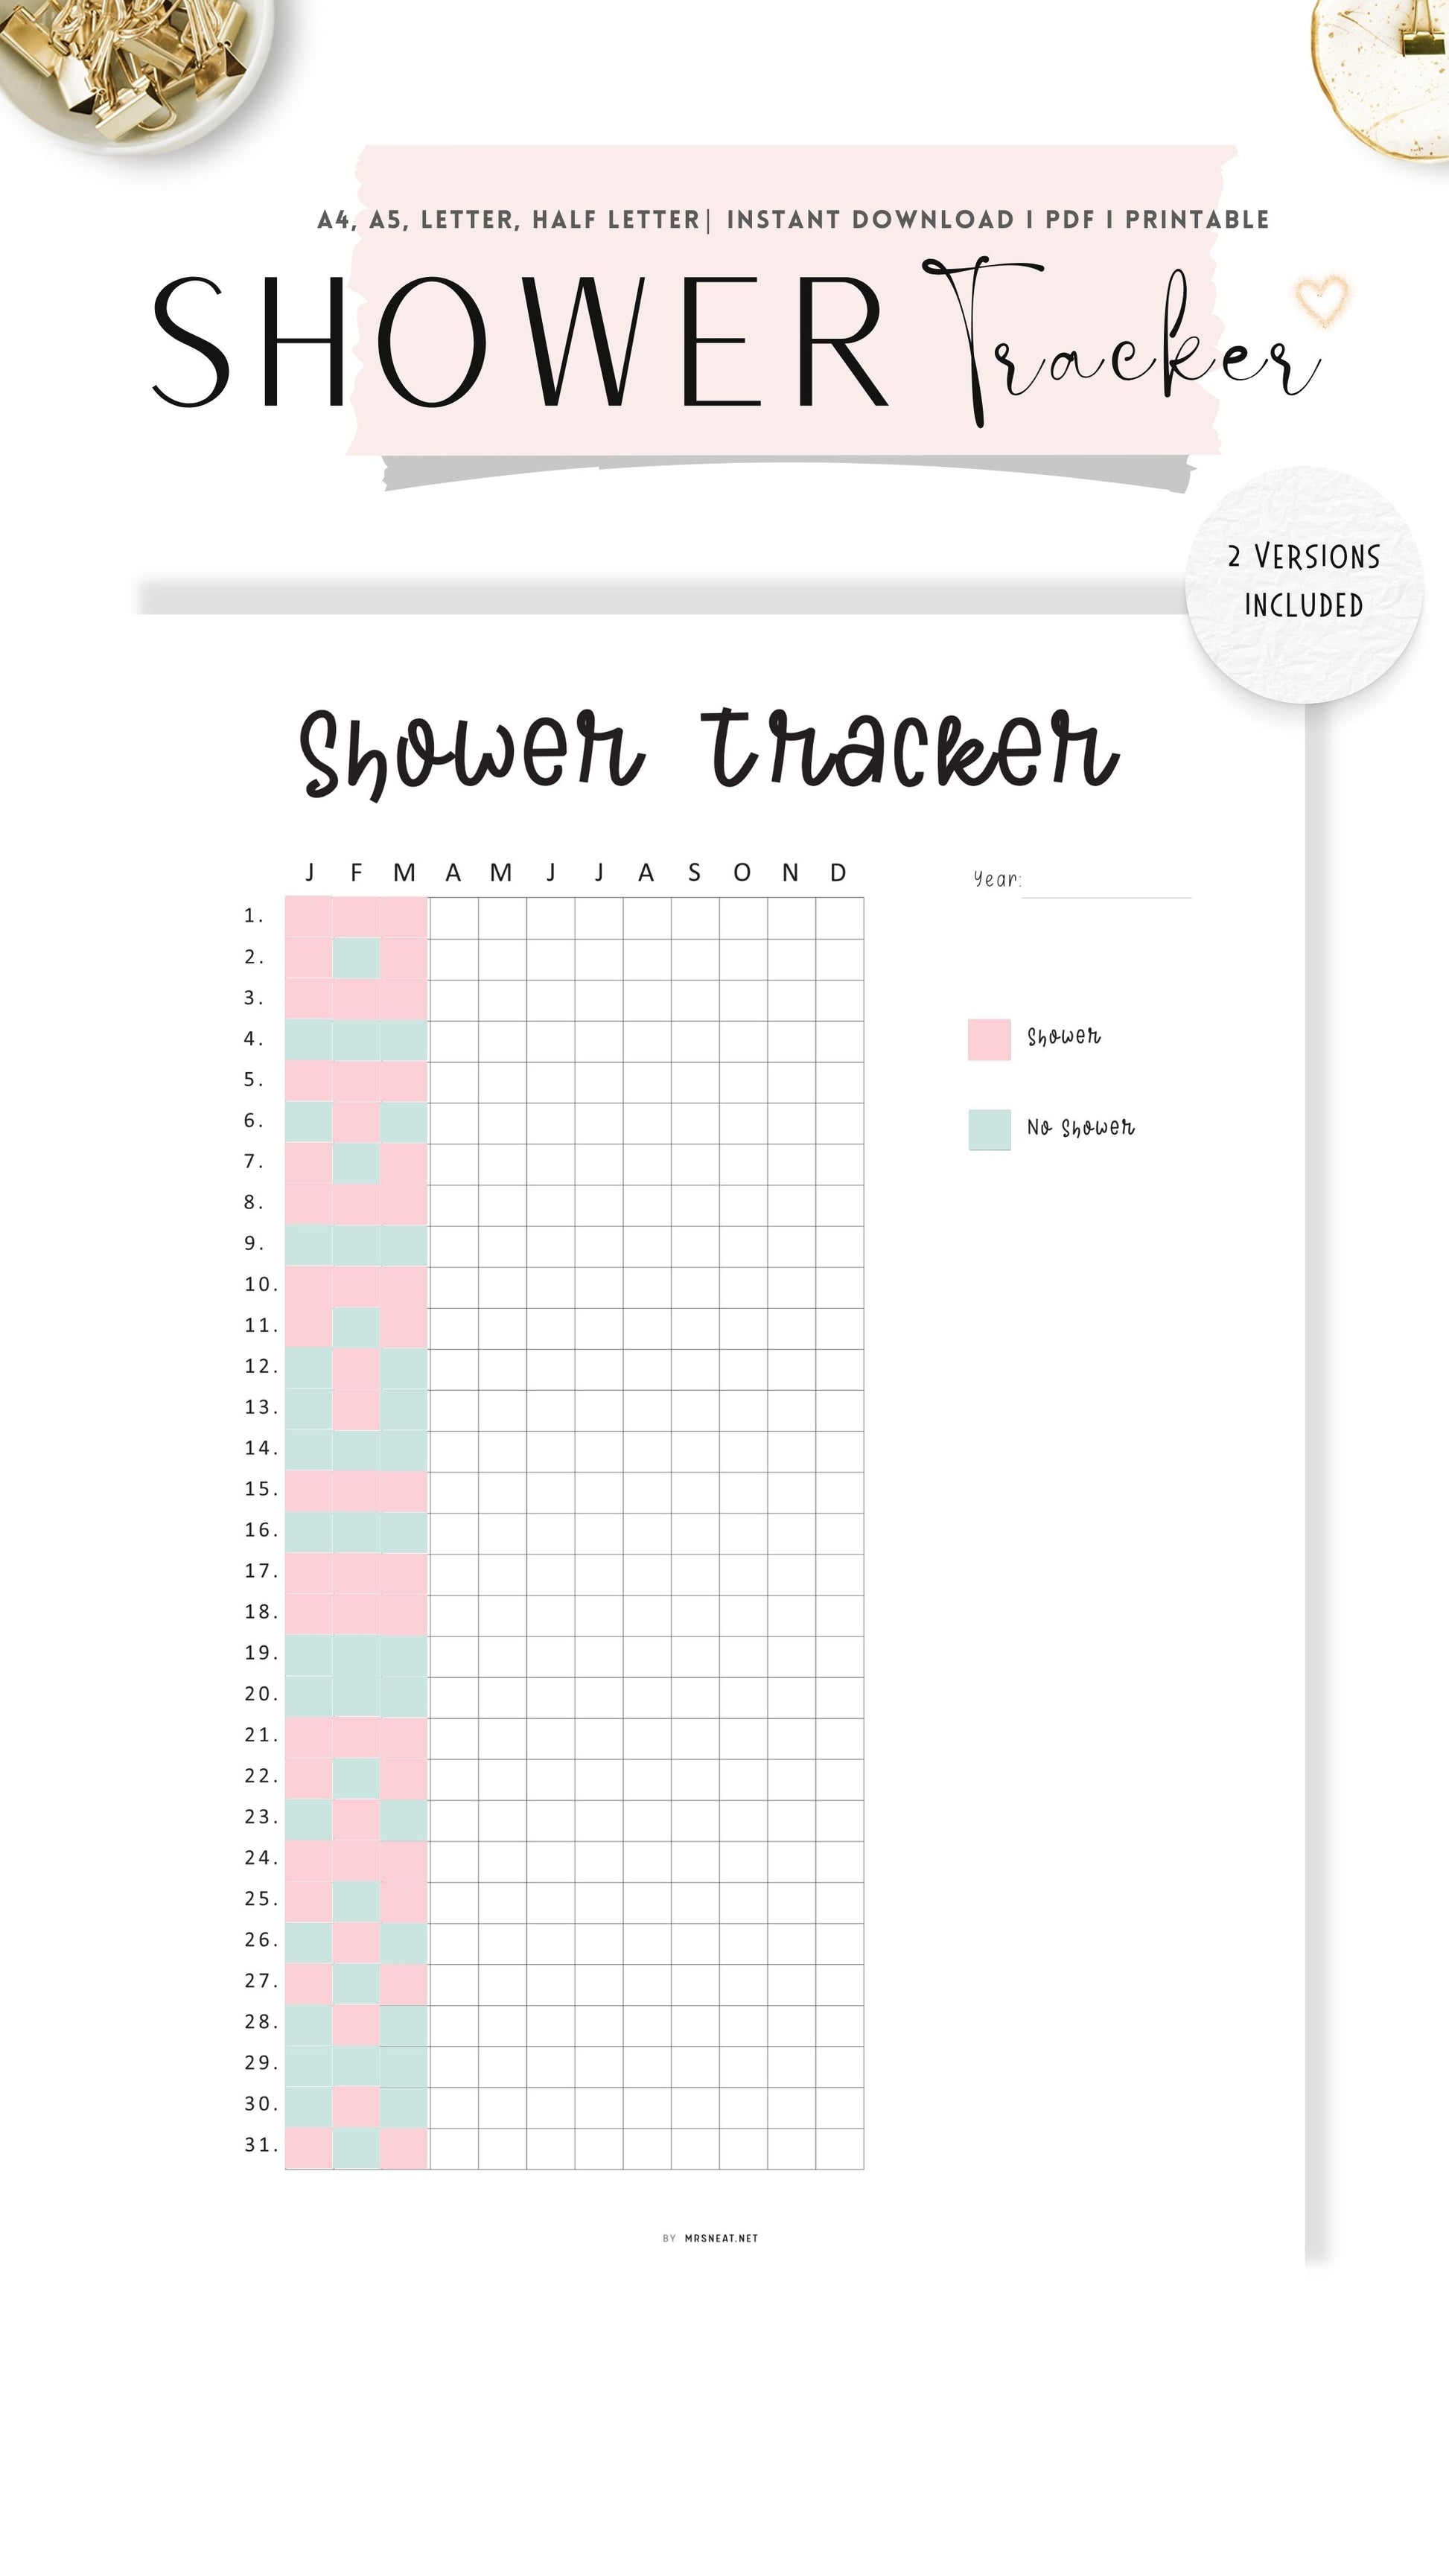 One Year Shower Tracker Template PDF